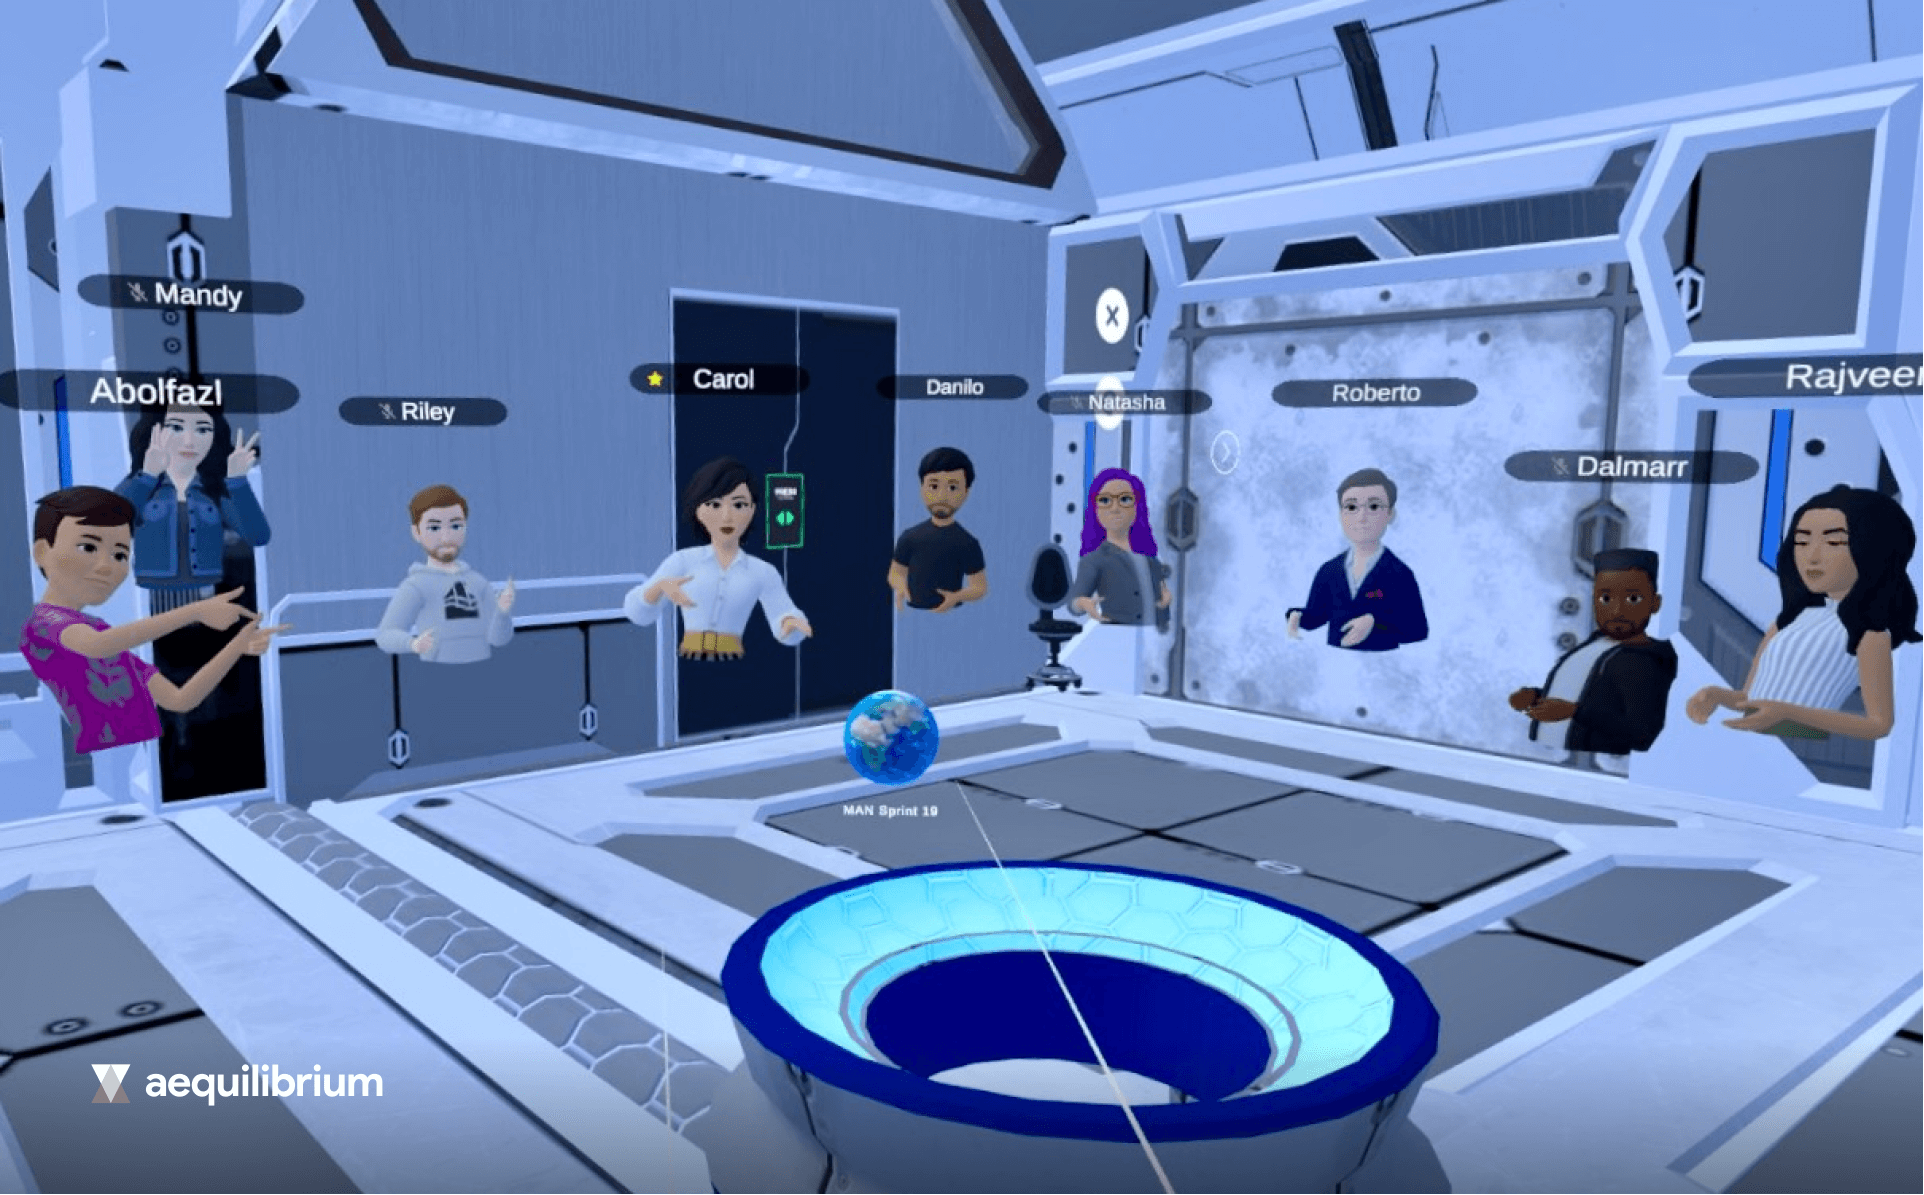 AgileVR helps improve productivity and collaboration for Agile distributed teams